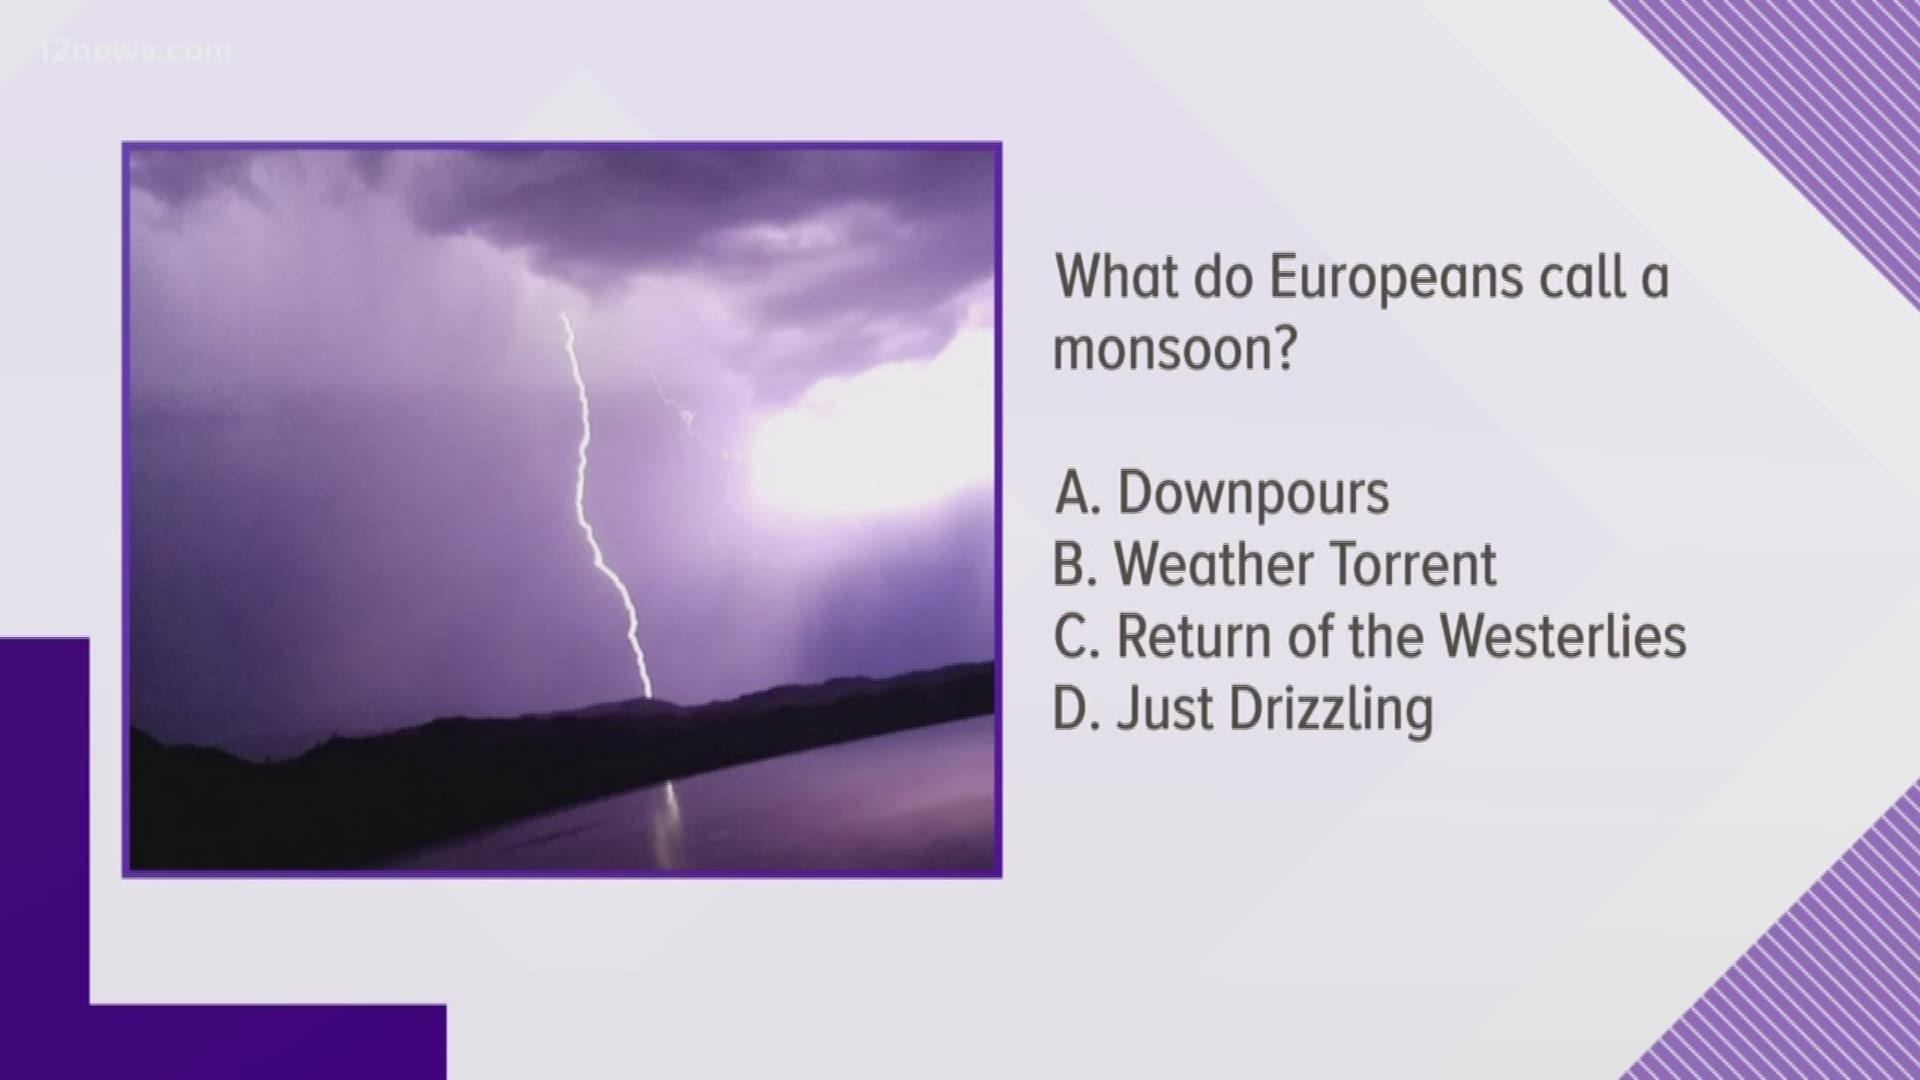 Europeans call monsoons what?